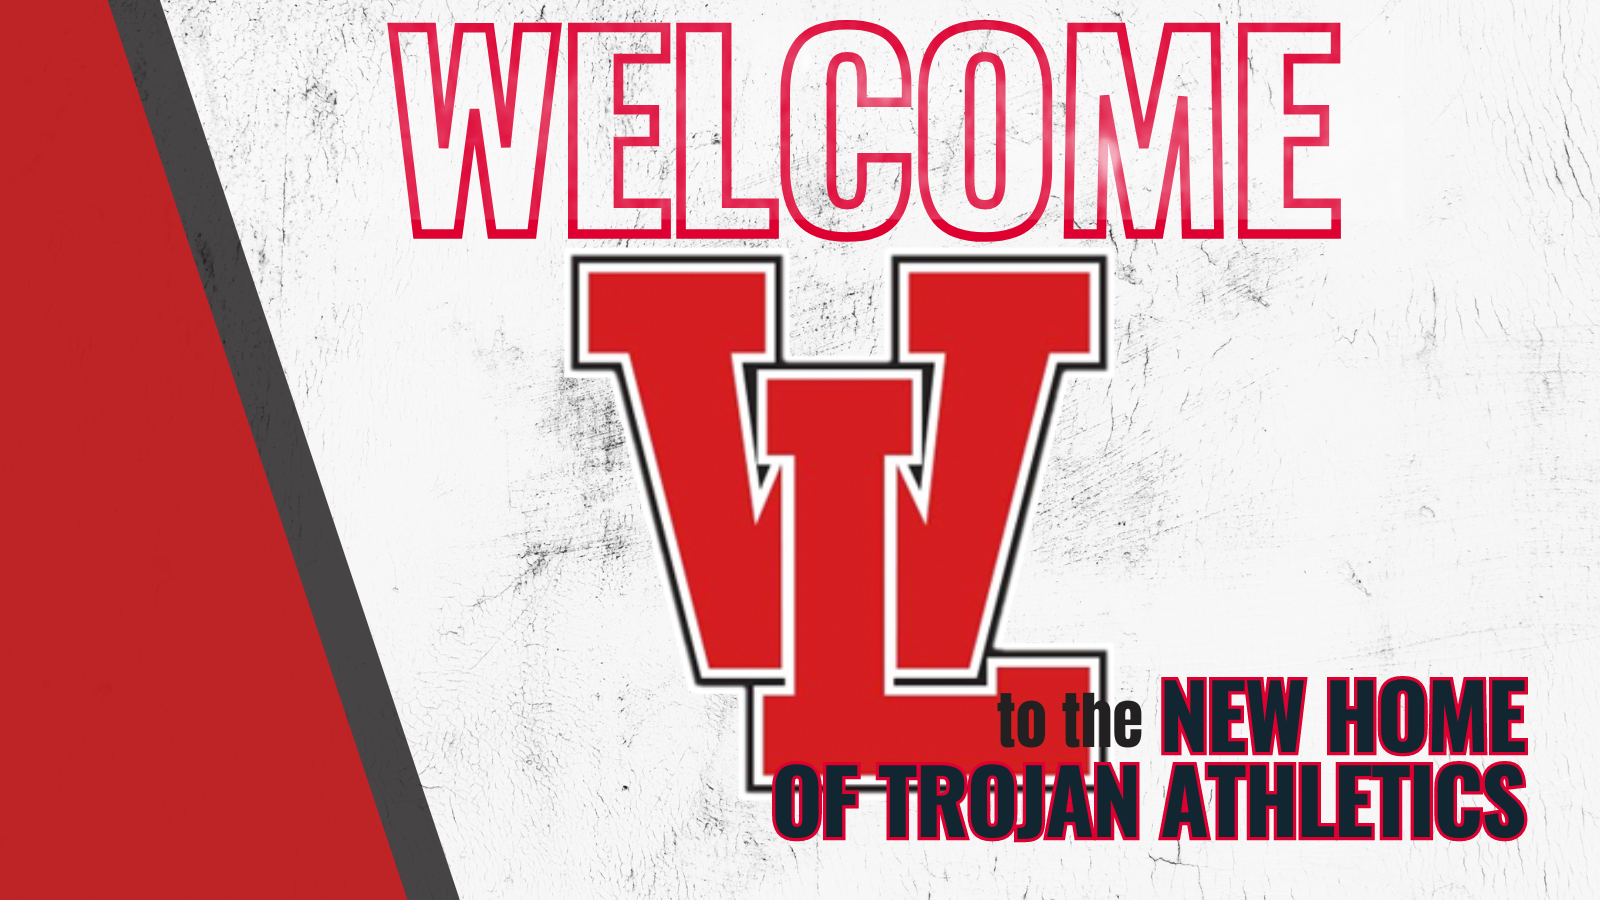 1710518426_WelcometoTwitterPost5.png - Image for 🎉 Exciting News for Trojan Athletics Fans! 🎉